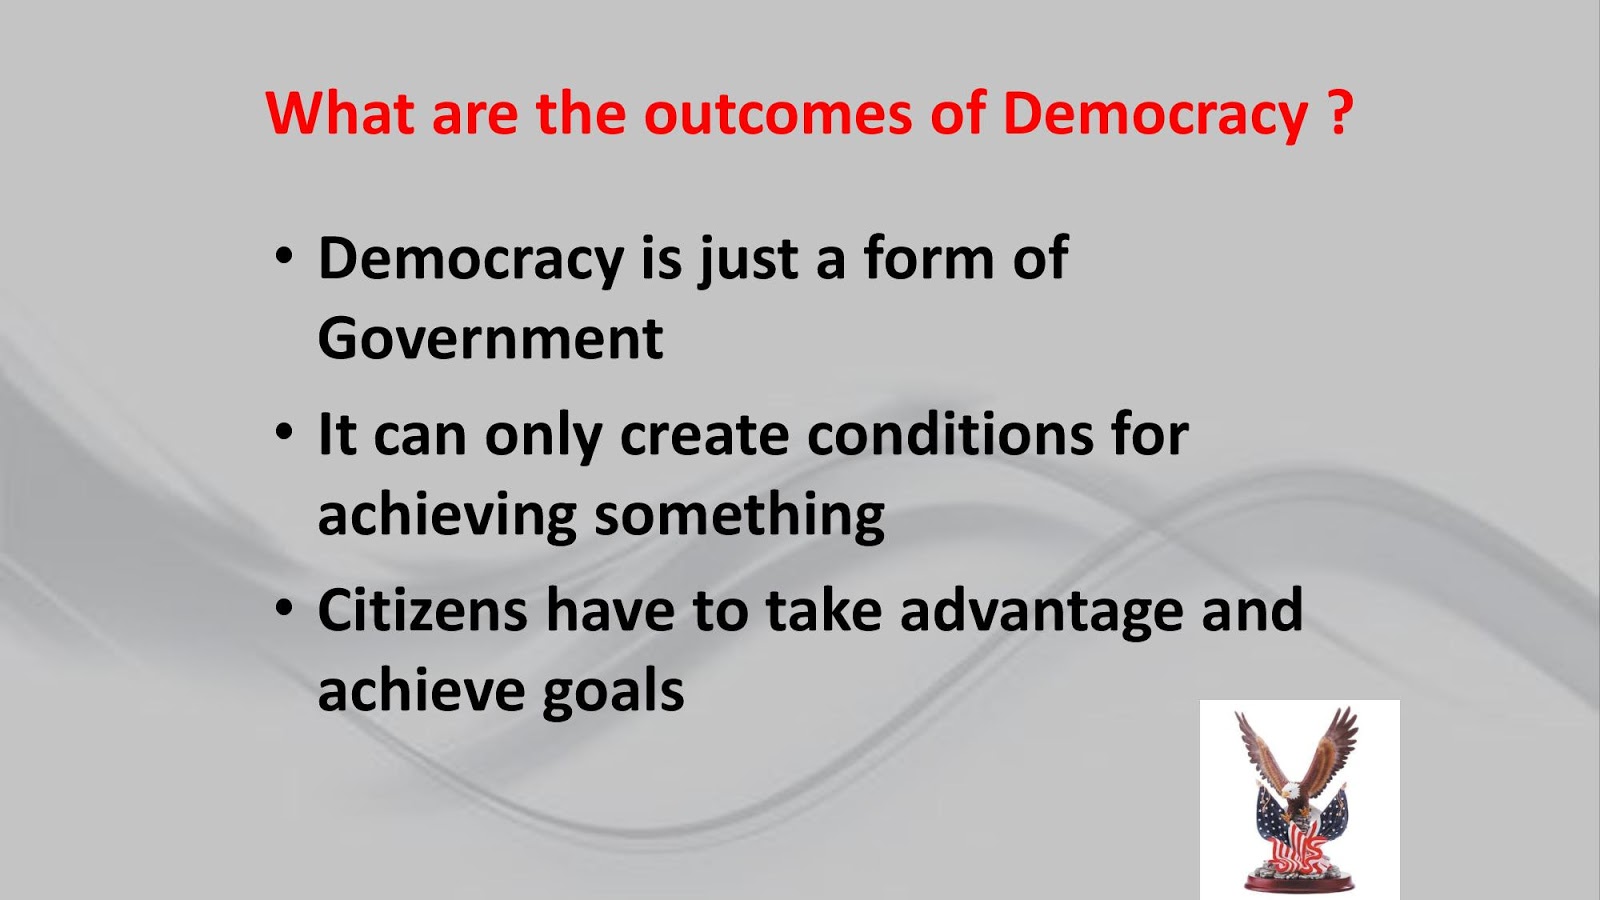 outcomes of democracy class 10 assignment